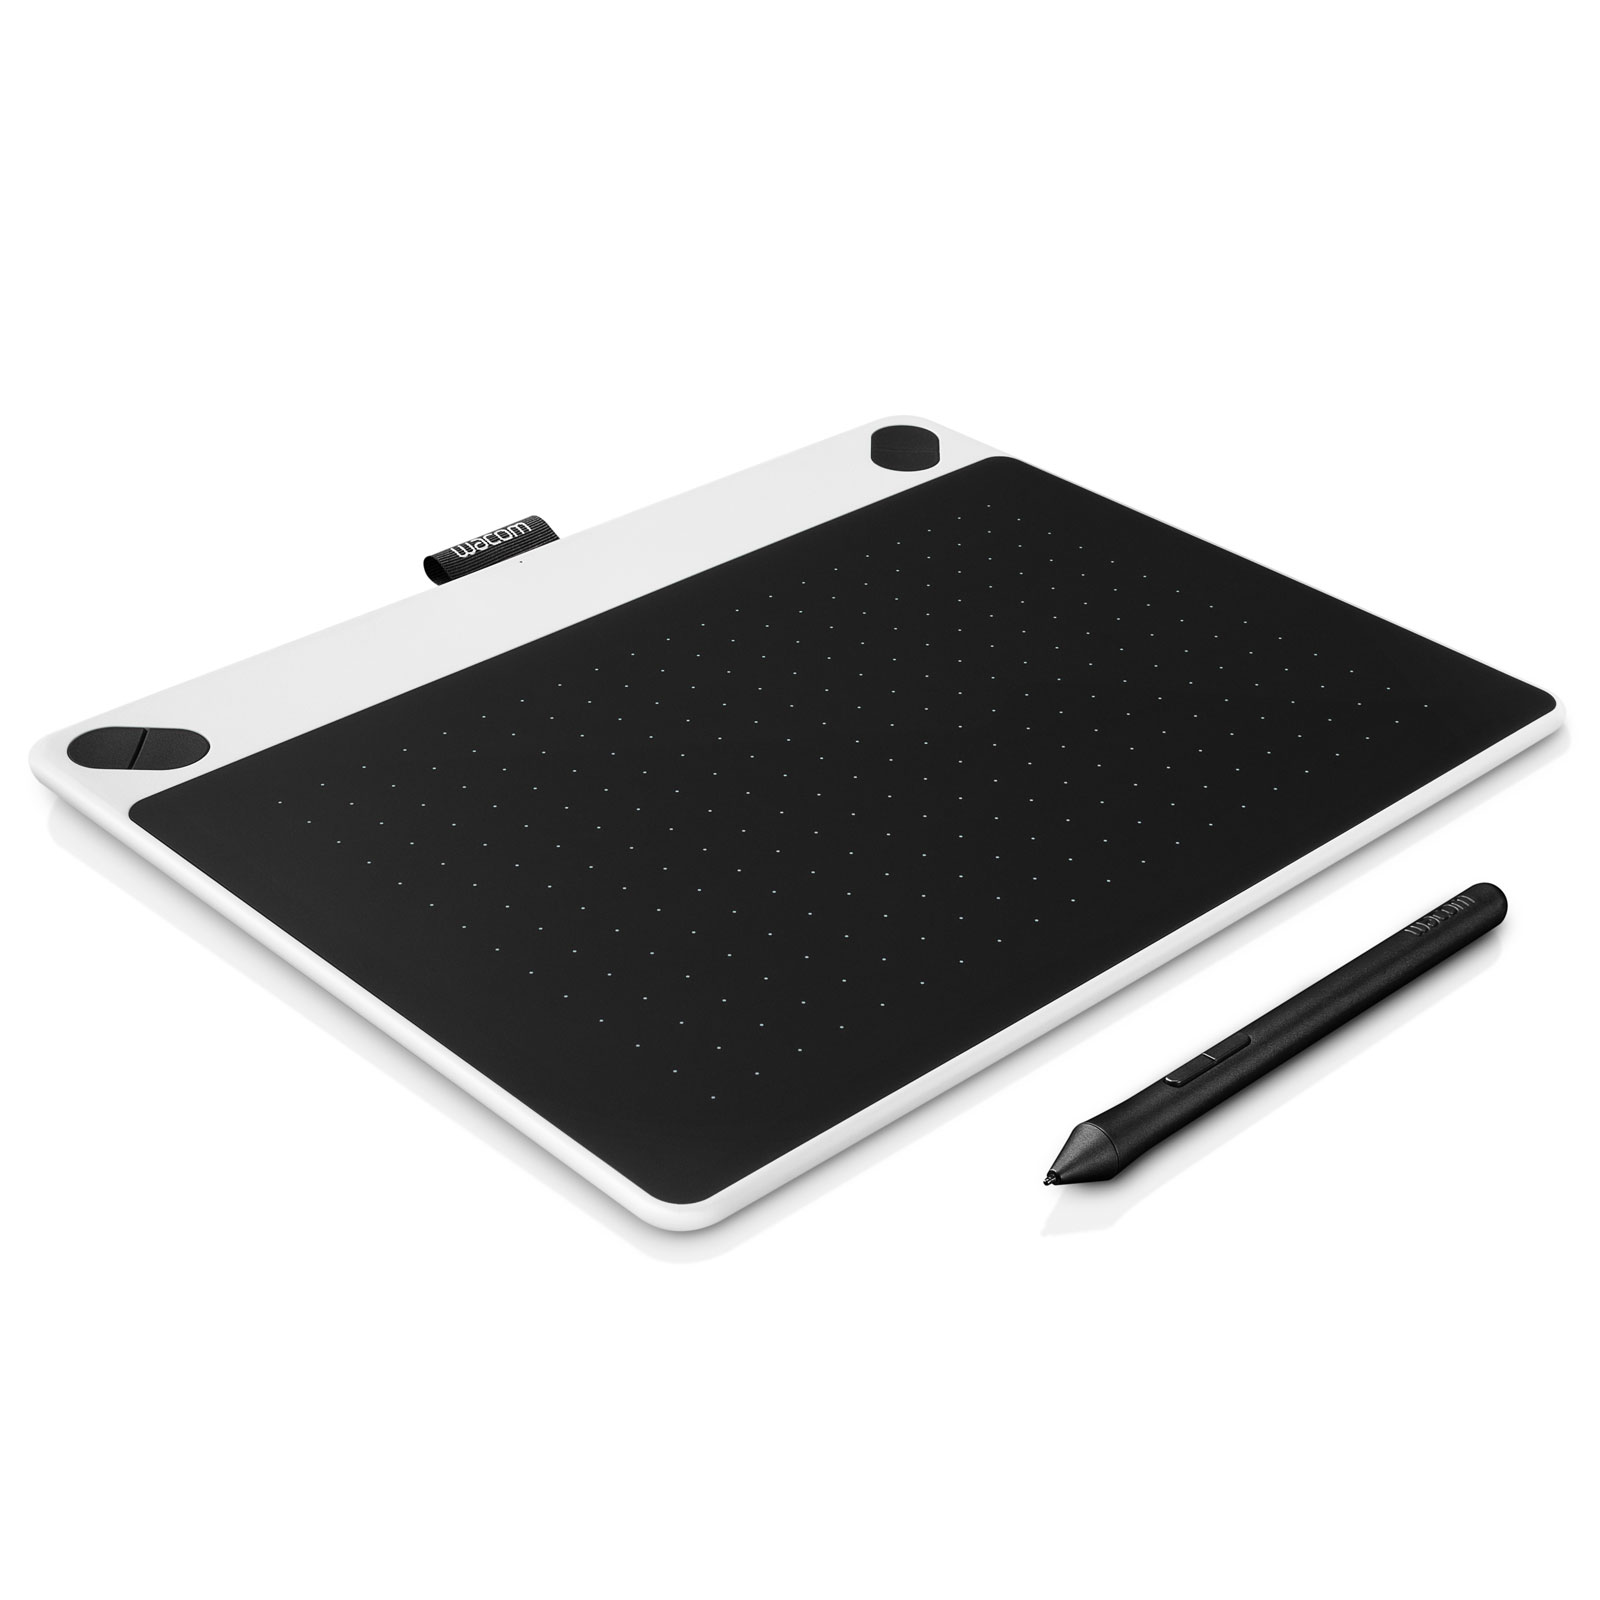 Intuos Draw Small Blanc Tablette graphique sur